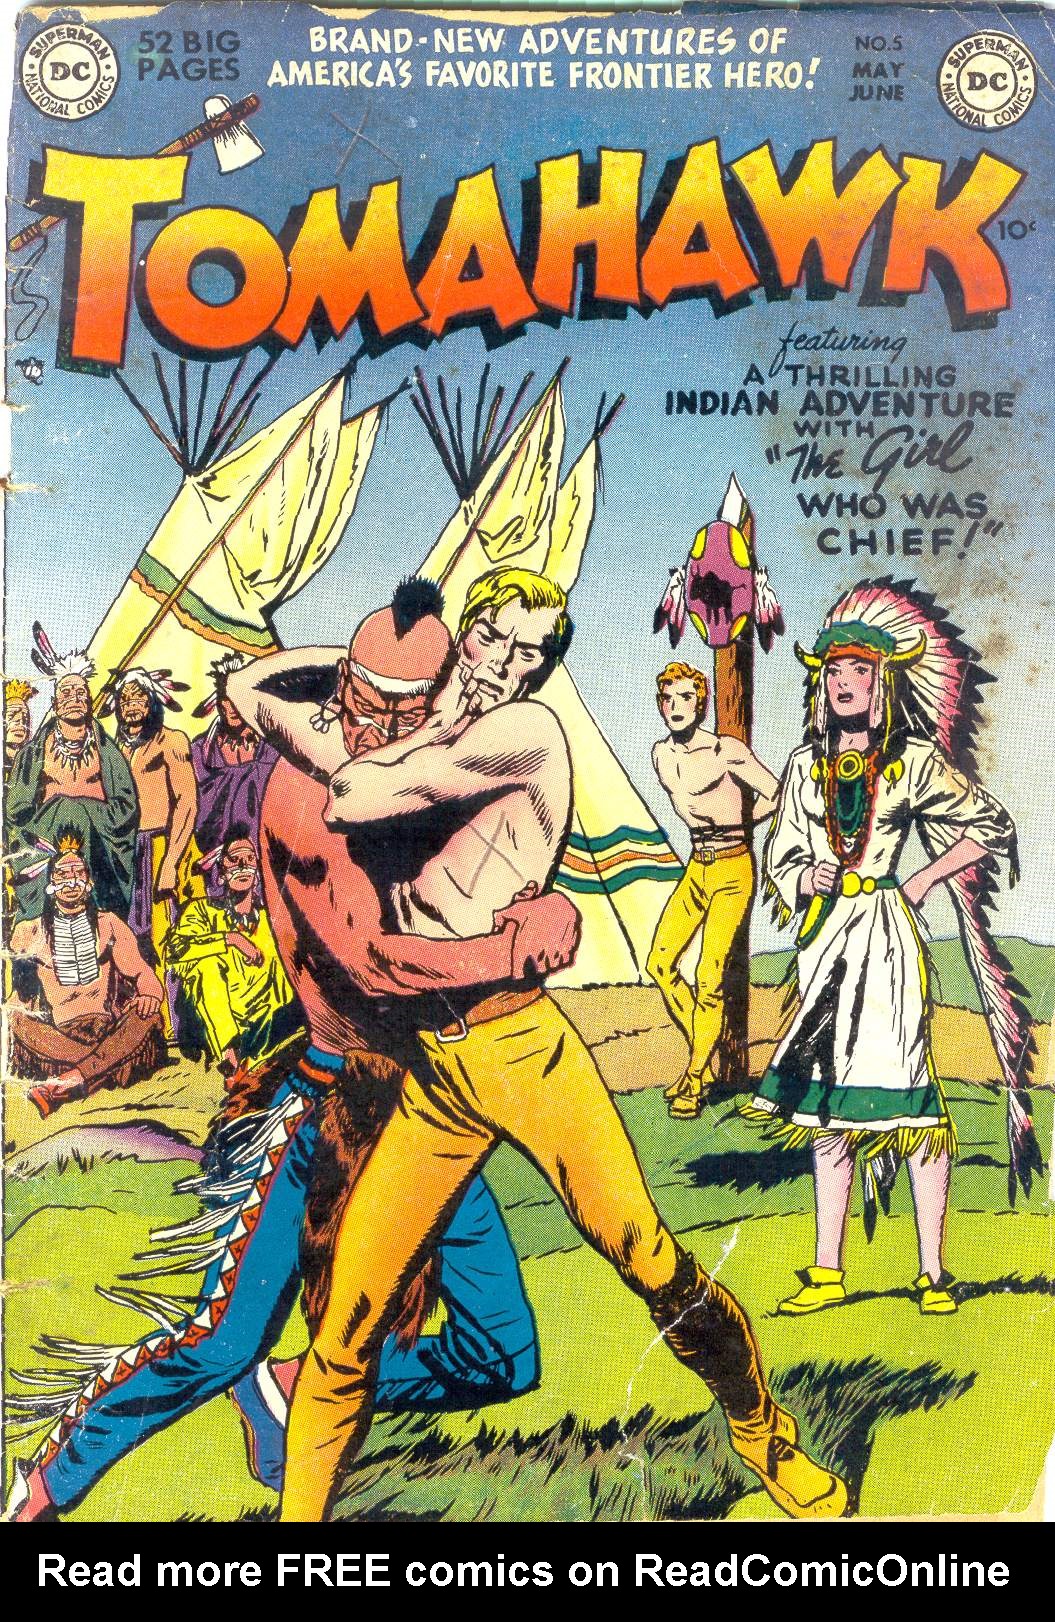 Read online Tomahawk comic -  Issue #5 - 1